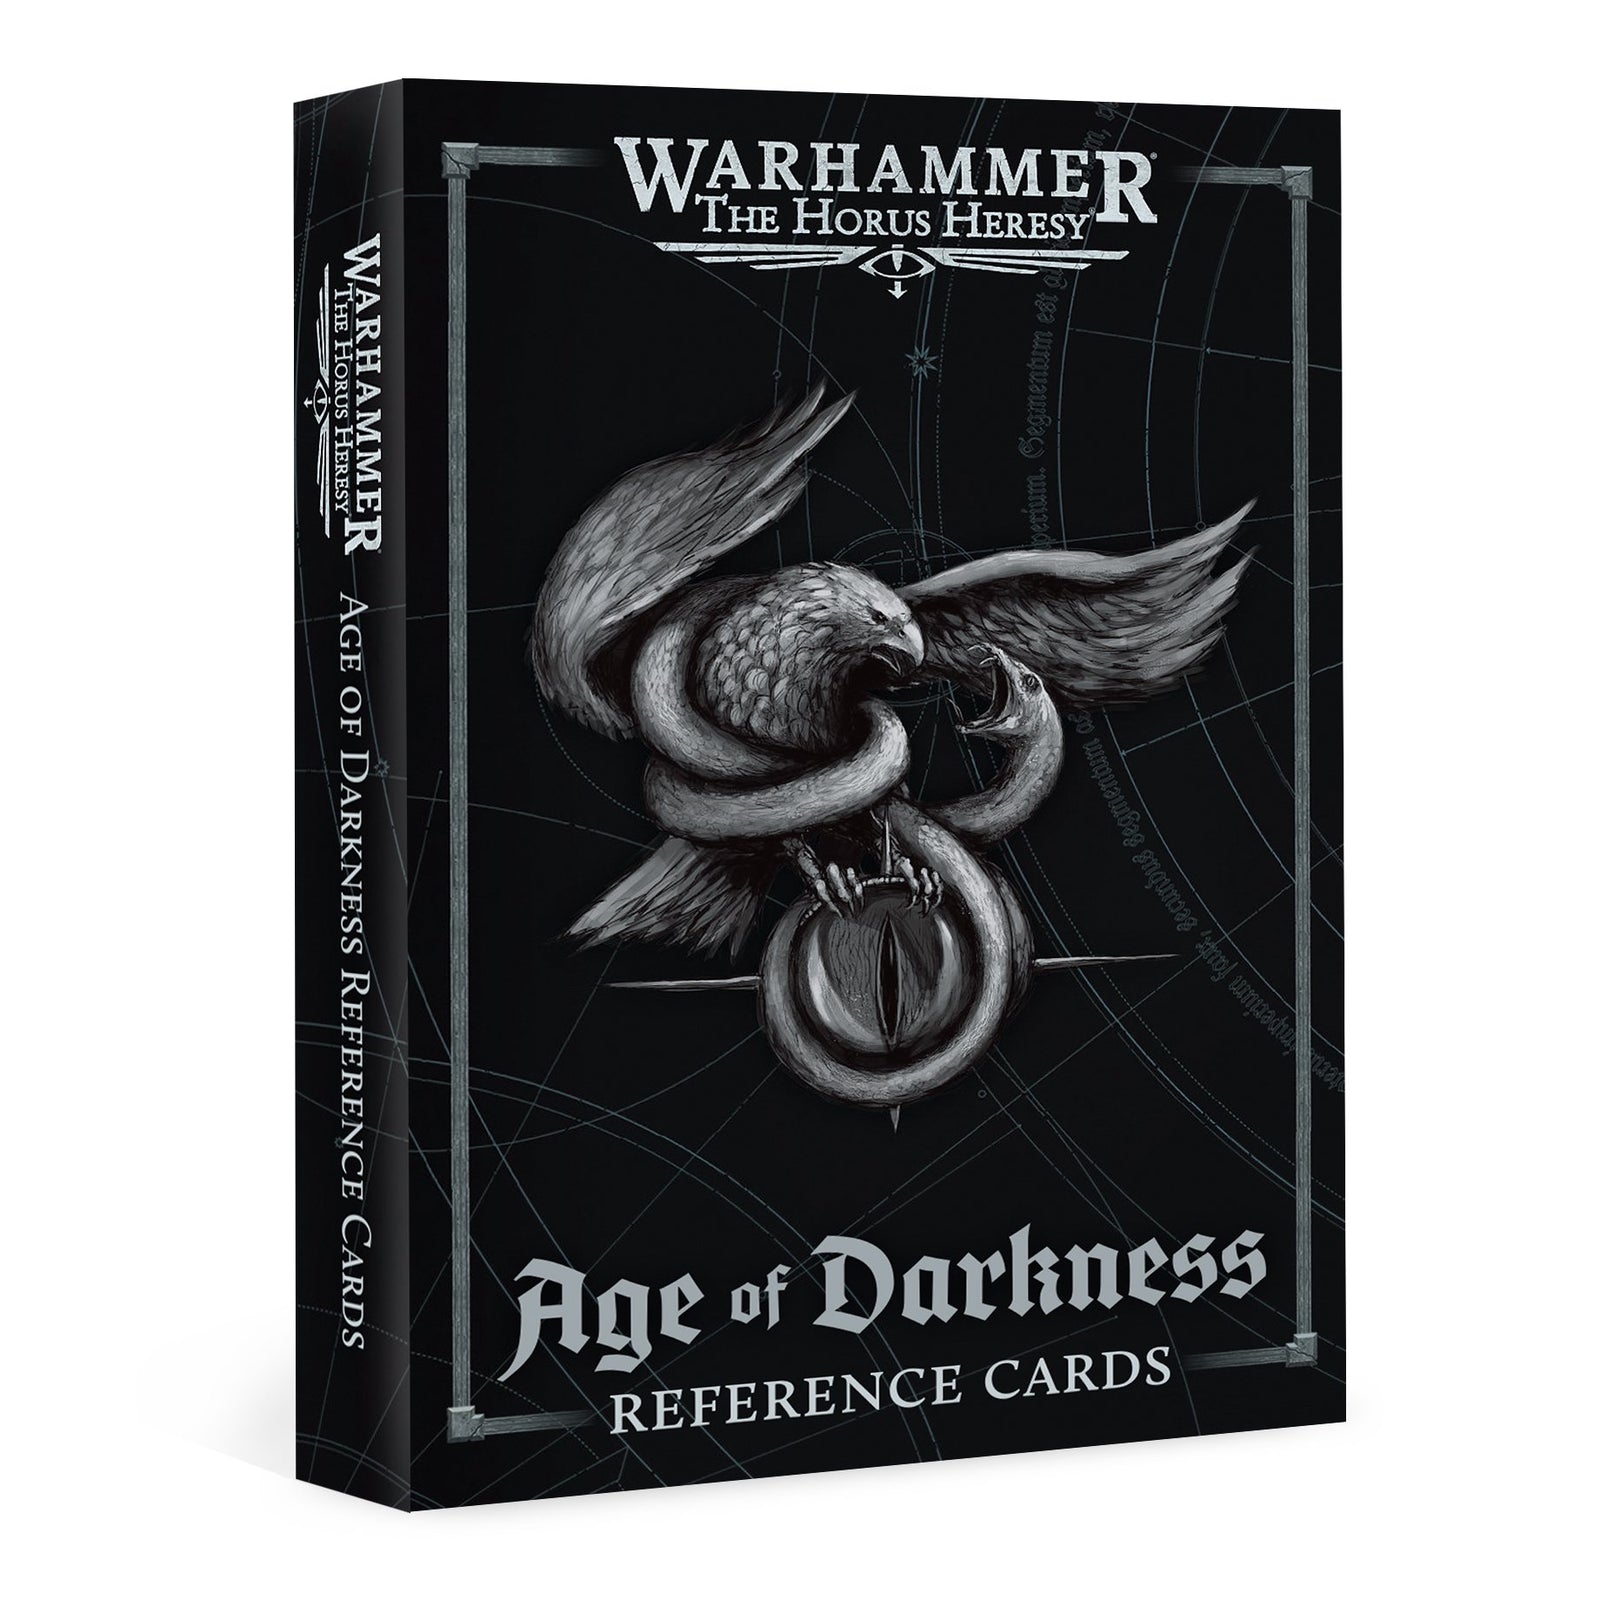 Horus Heresy - Age of Darkness Reference Cards